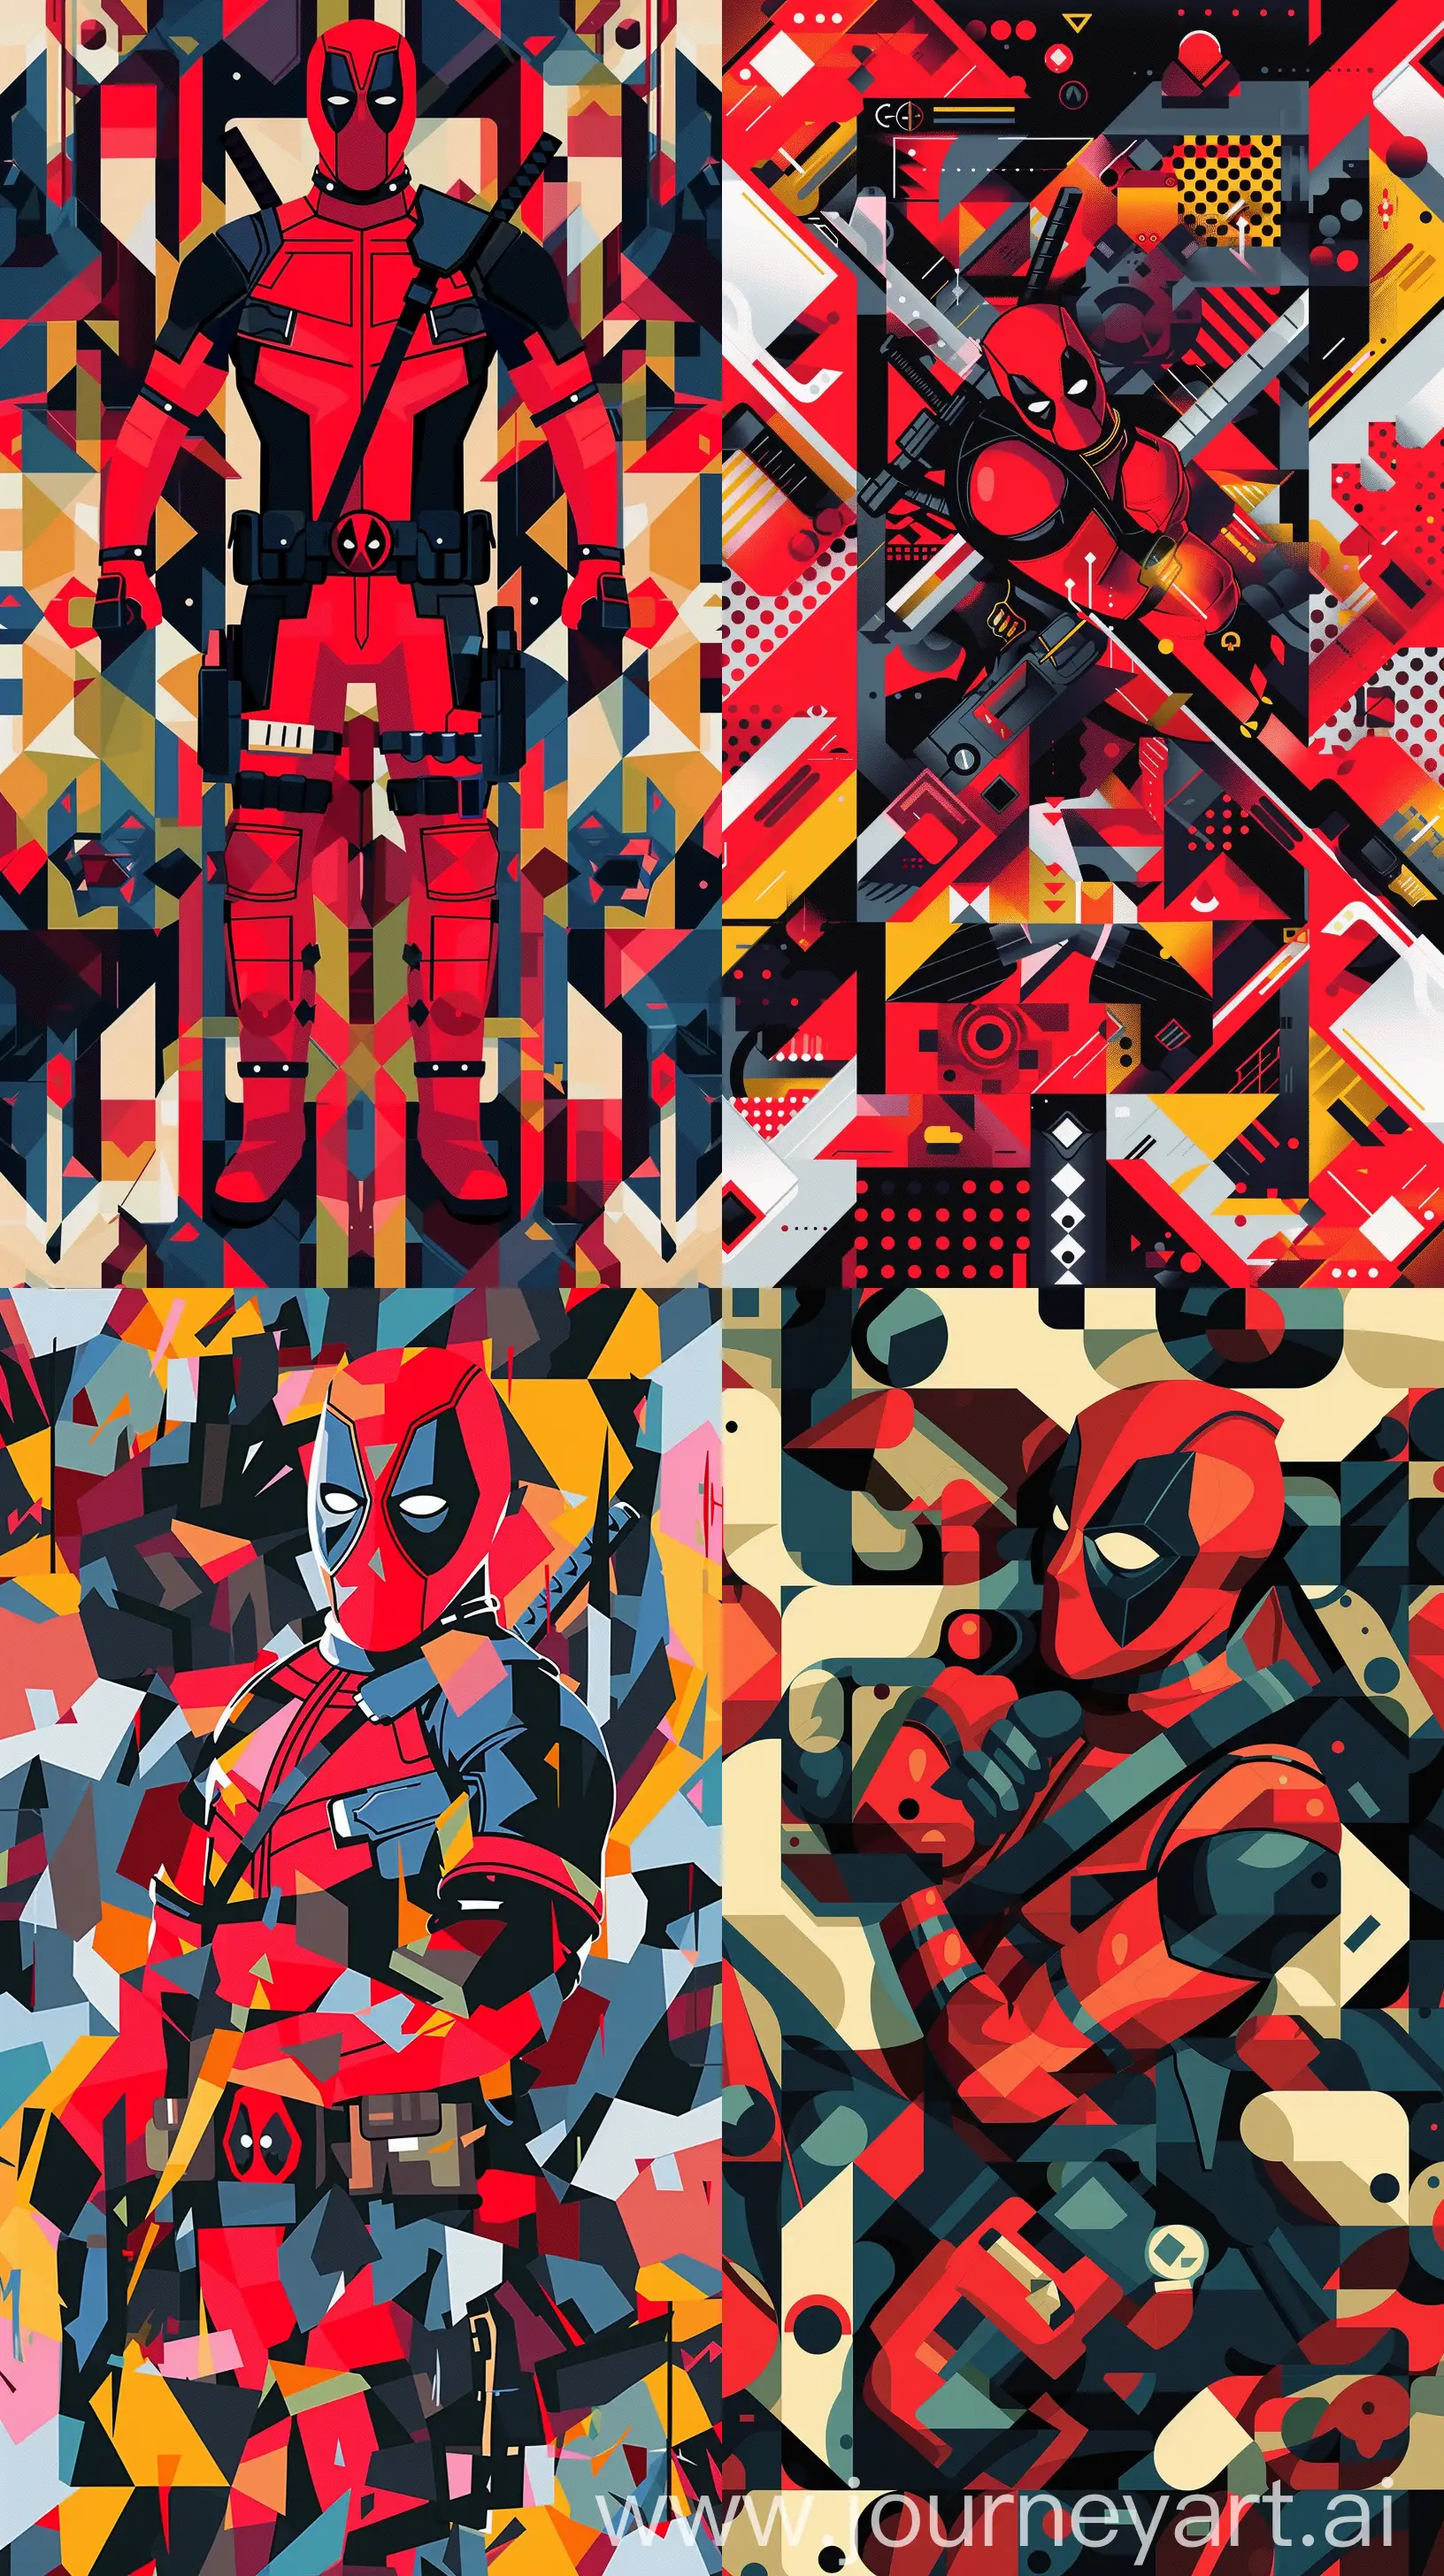 Envision a phone wallpaper that infuses Natalie du Pasquier's bold and colorful design language with the irreverent charm of Deadpool. Picture a pattern of interlocking shapes and vibrant blocks of color that form an abstract representation of Deadpool's iconic red and black suit, with subtle hints of his weapons and gear integrated into the geometric design. The result is a playful and visually arresting homage to the superhero that doubles as a statement piece for your phone. --ar 9:16